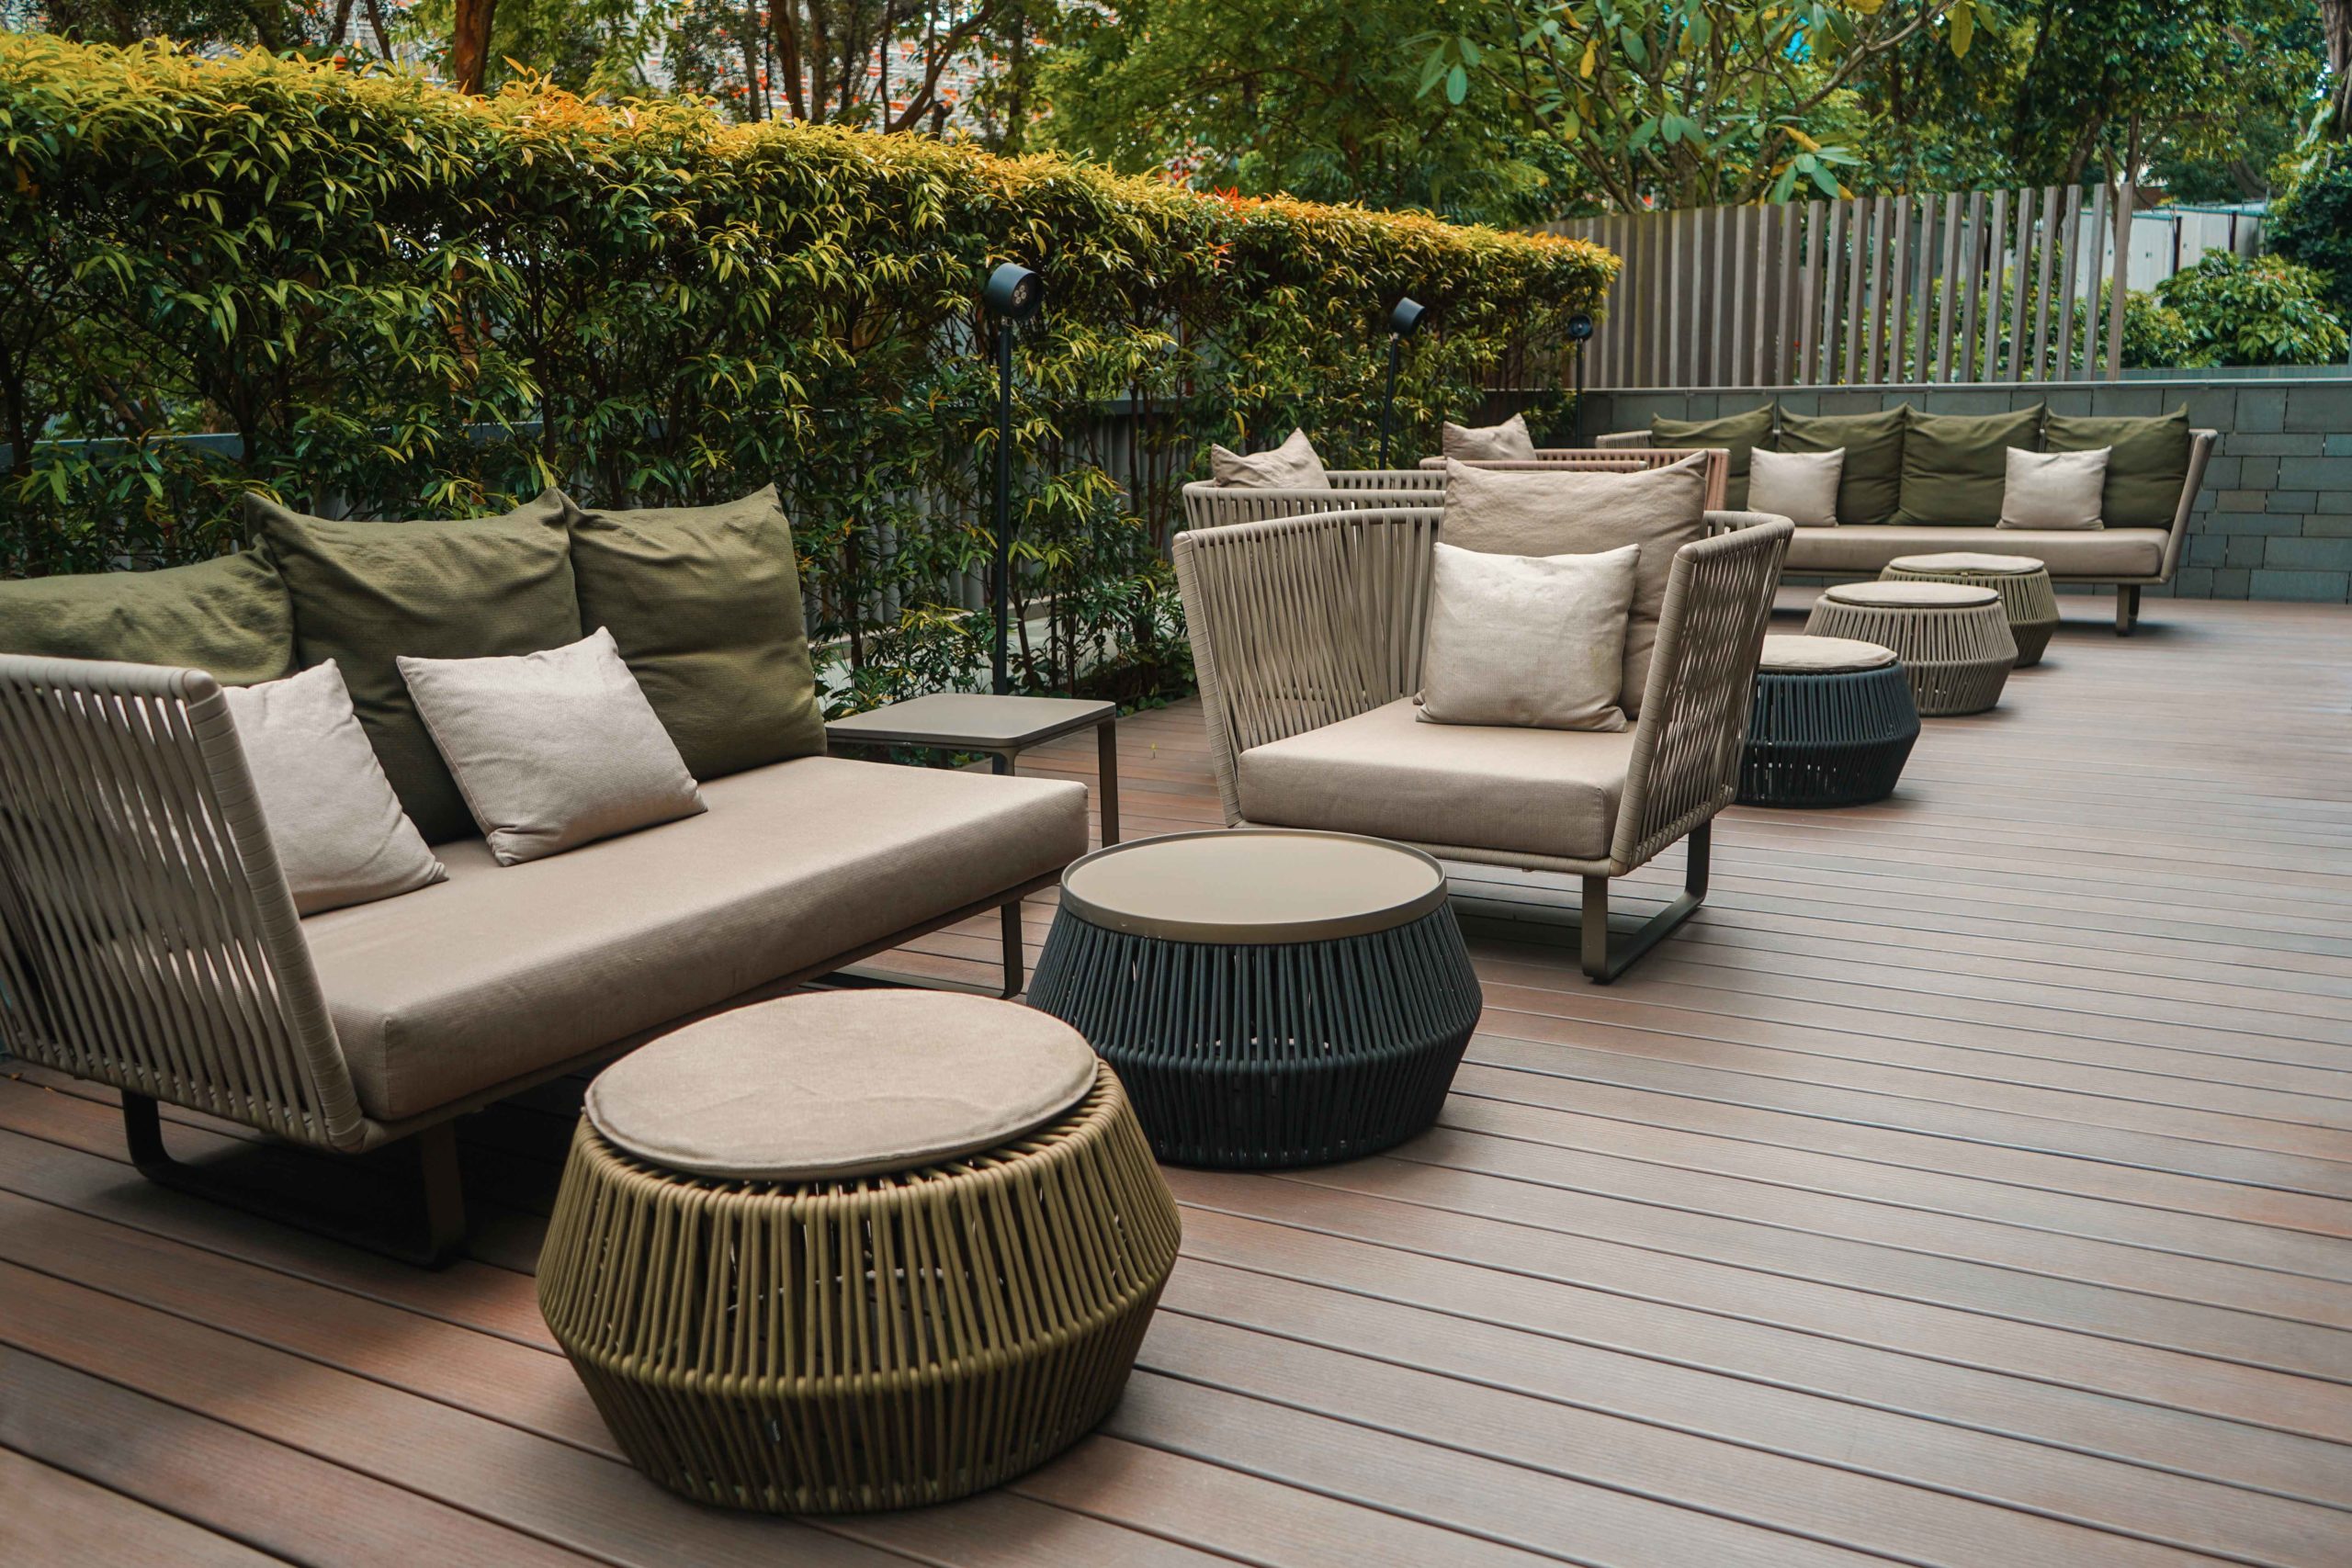 Tulou Composite Timber Decking Singapore 3 Orchard By The Park 2 scaled - 3 Orchard By-The-Park